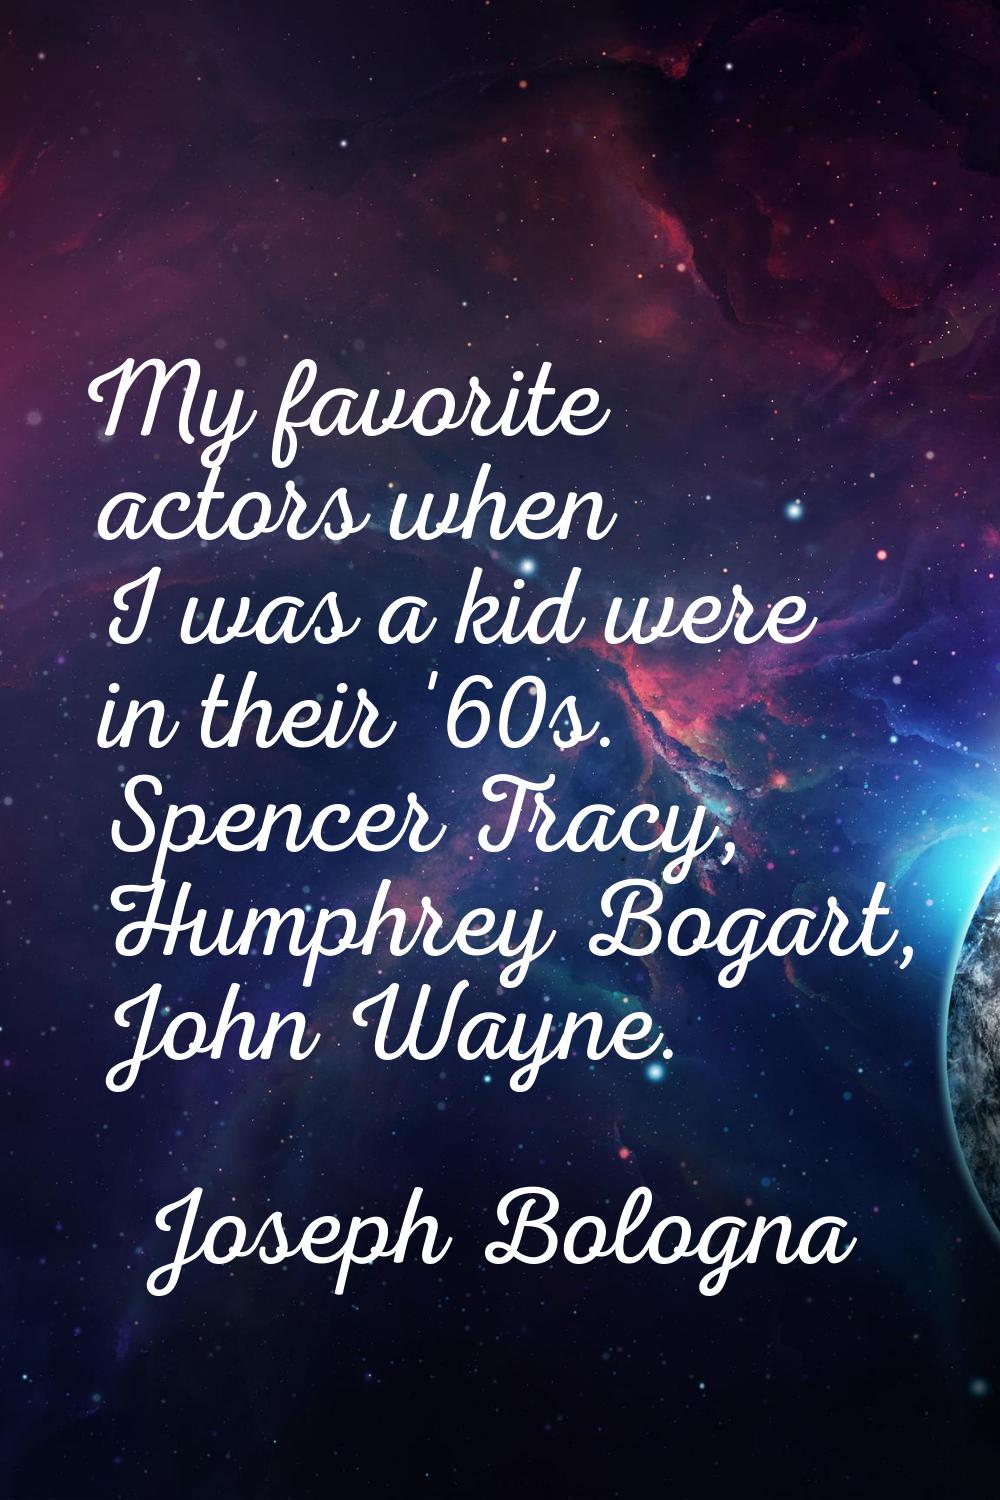 My favorite actors when I was a kid were in their '60s. Spencer Tracy, Humphrey Bogart, John Wayne.